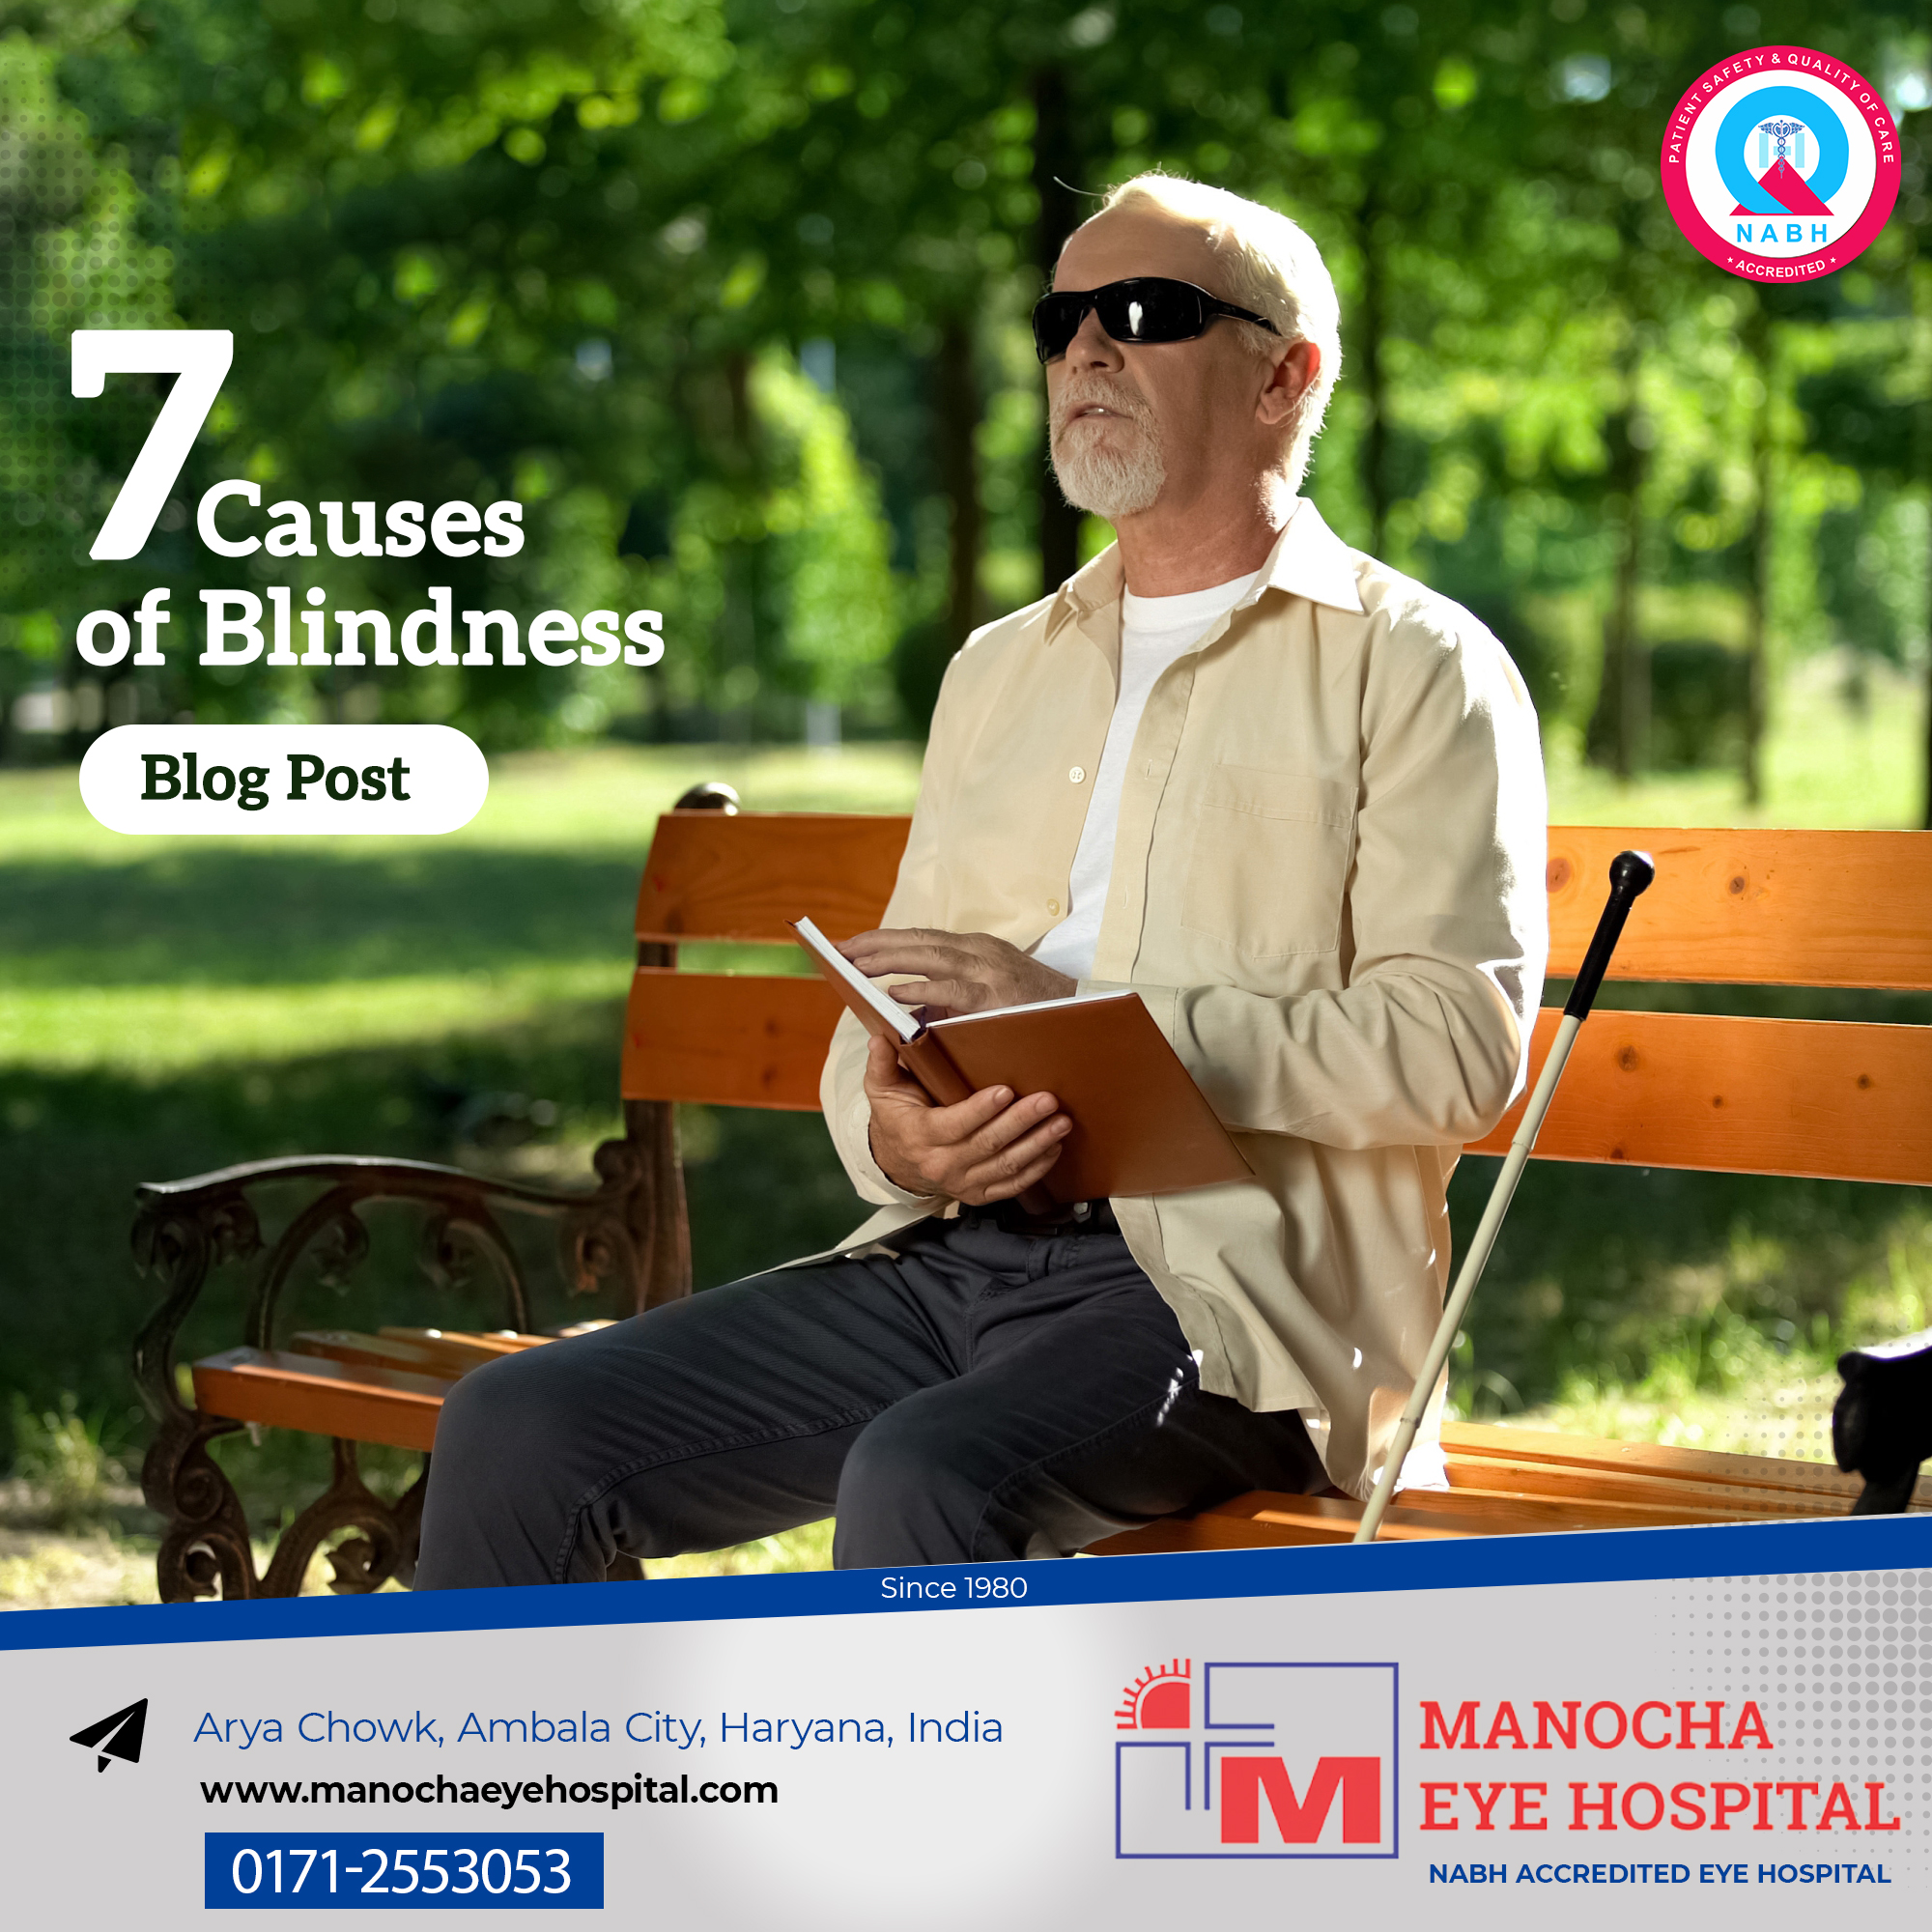 what are the 7 causes of blindness? Explained by Manocha Eye Hospital